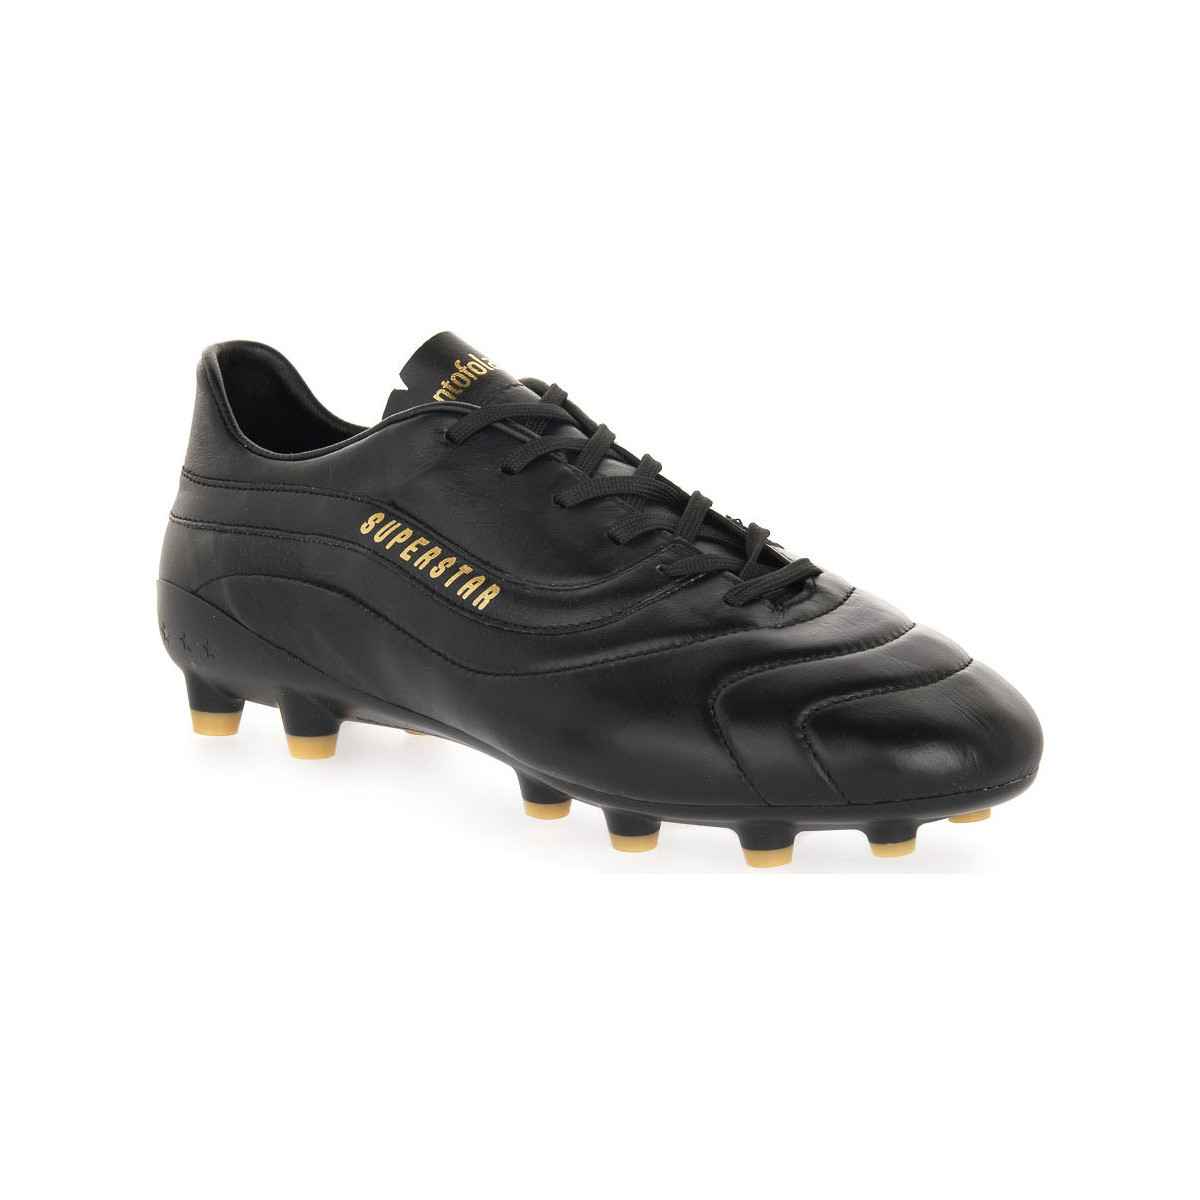 Chaussures Homme Football Pantofola d'Oro SUPERSTAR LC CANGURO NERO PU Noir